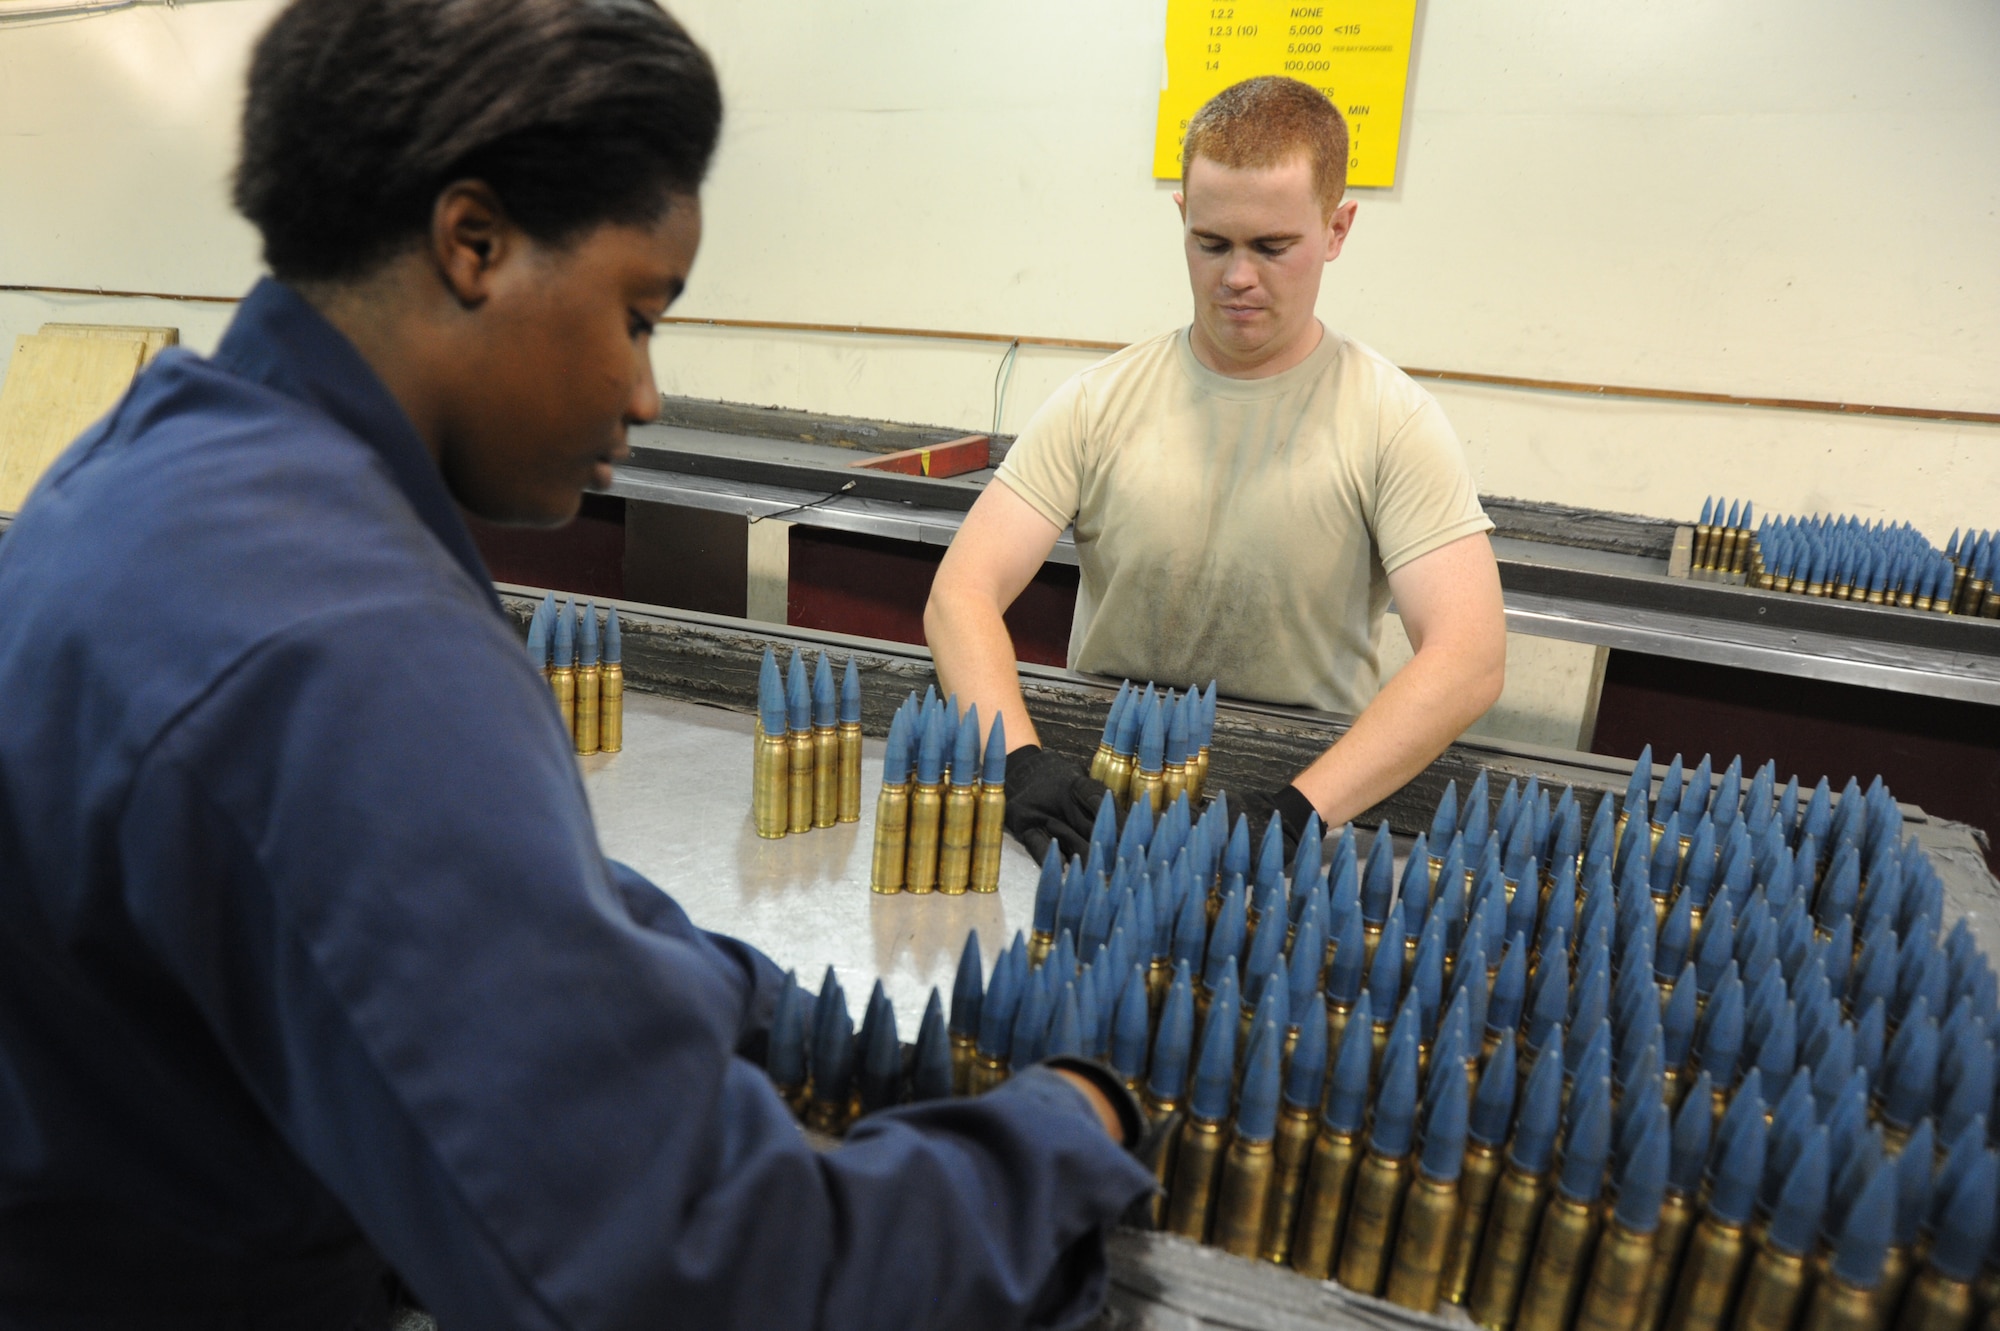 Senior Airman Kamela Arnold and Airman 1st Class Michael Sexton, 56th Equipment Maintenance Squadron conventional maintenance team members, count up the 20 millimeter rounds at Luke Air Force Base. They must account for and inspect each round for serviceability. (U.S. Air Force photo/Airman 1st Class James Hensley)